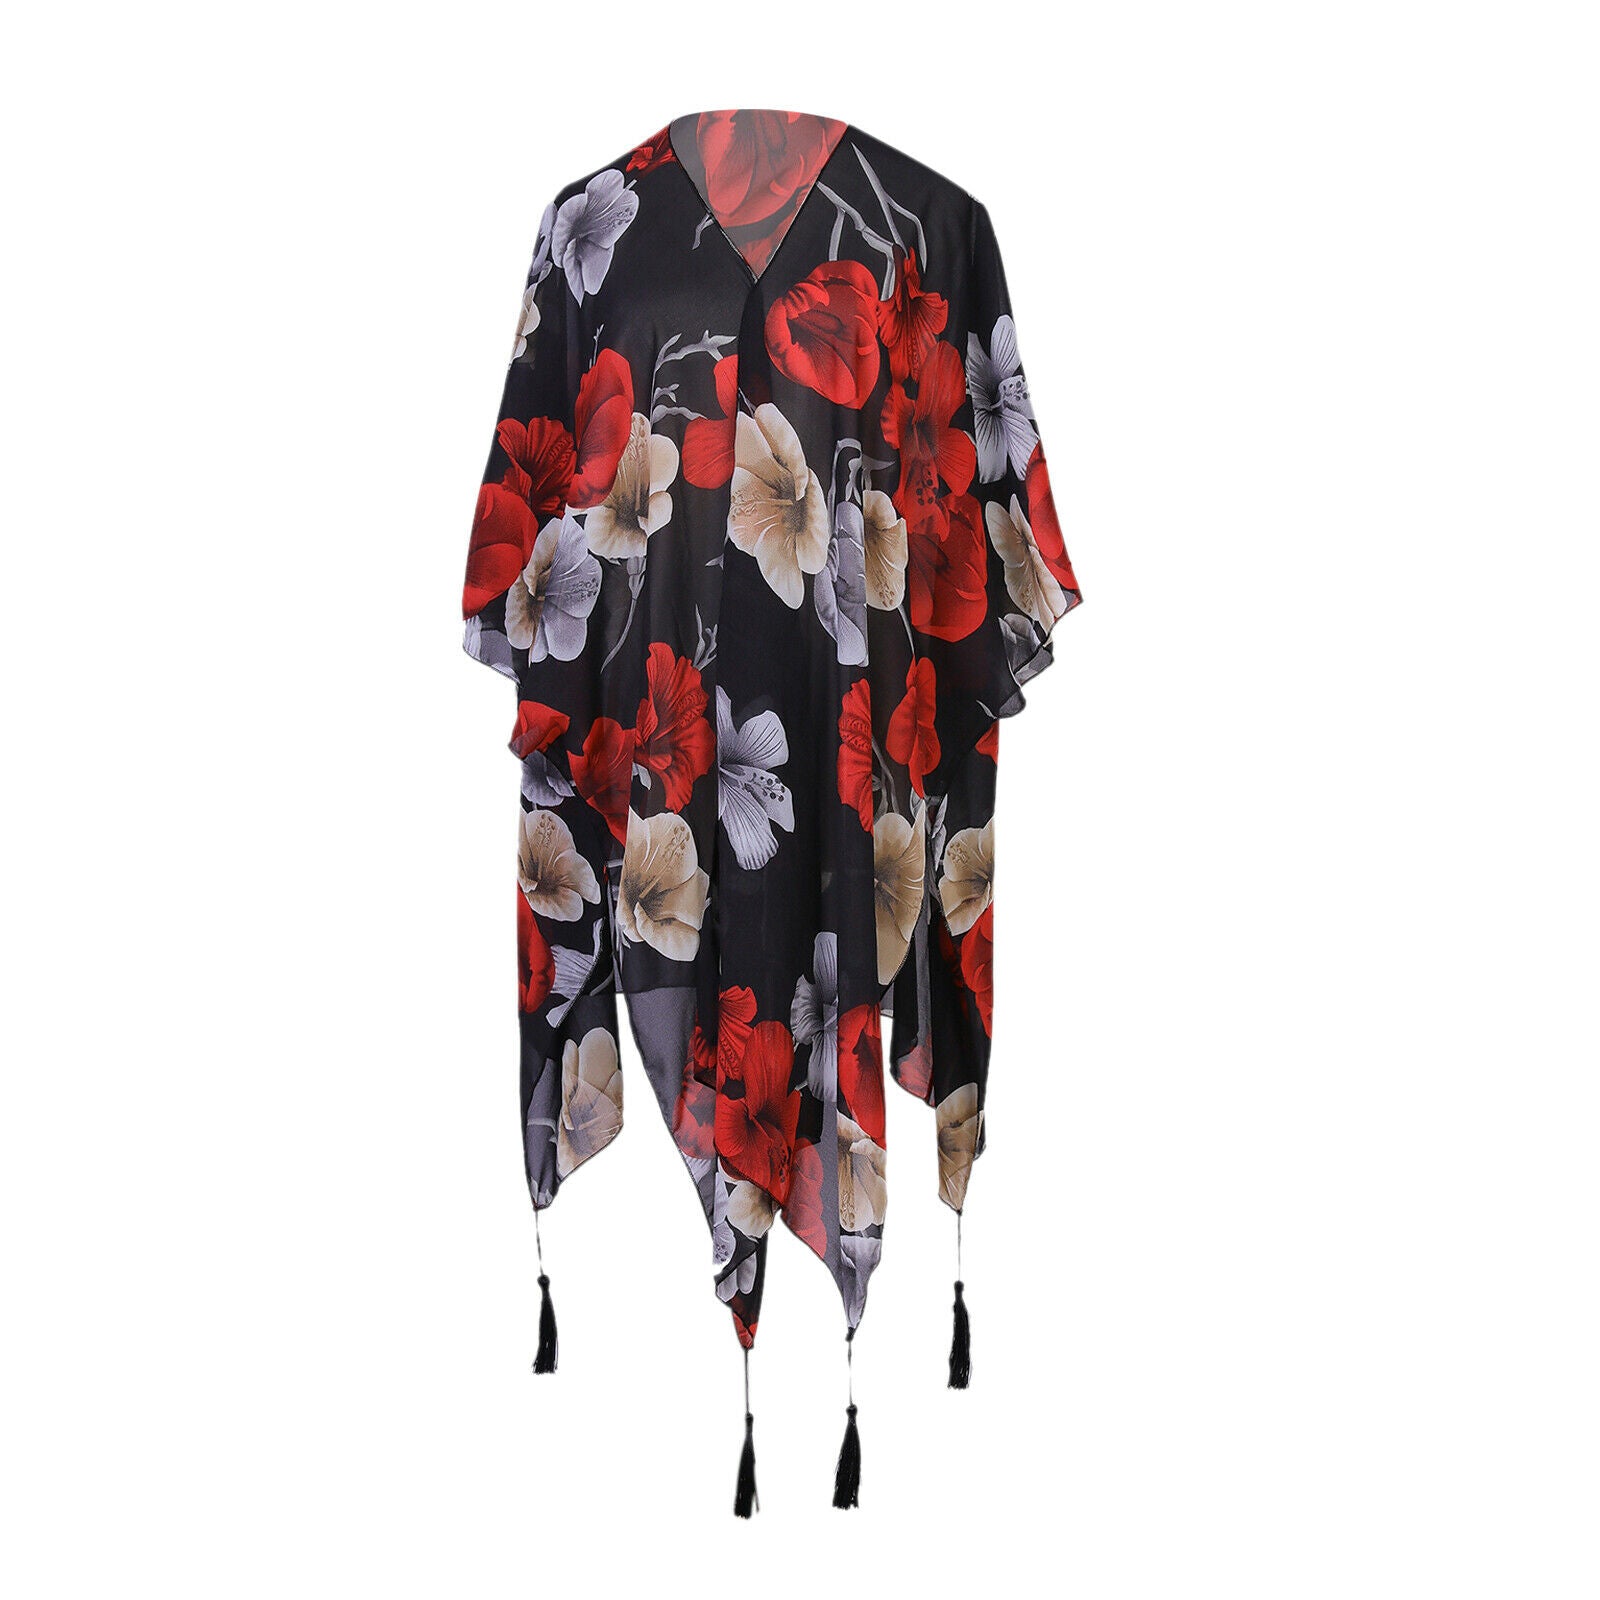 Lady Summer Floral Short Coat Sun Protection Cardigan Outwear Chiffon Tops